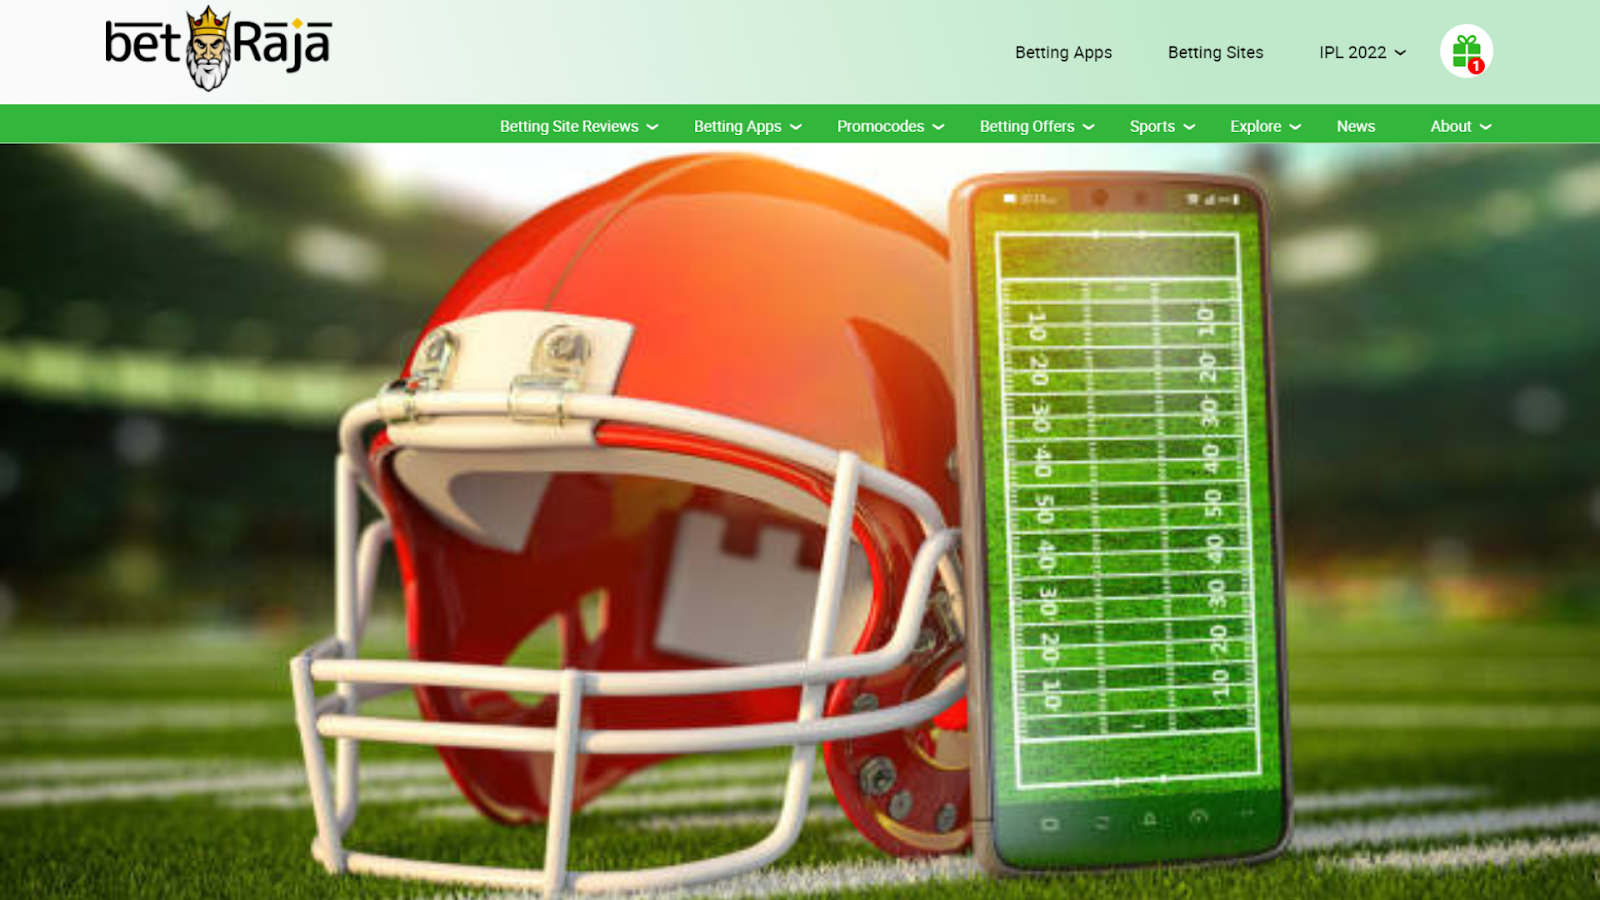 A vibrant image featuring a red cricket helmet next to a smartphone displaying a green betting on cricket app, set against a blurry cricket field background.